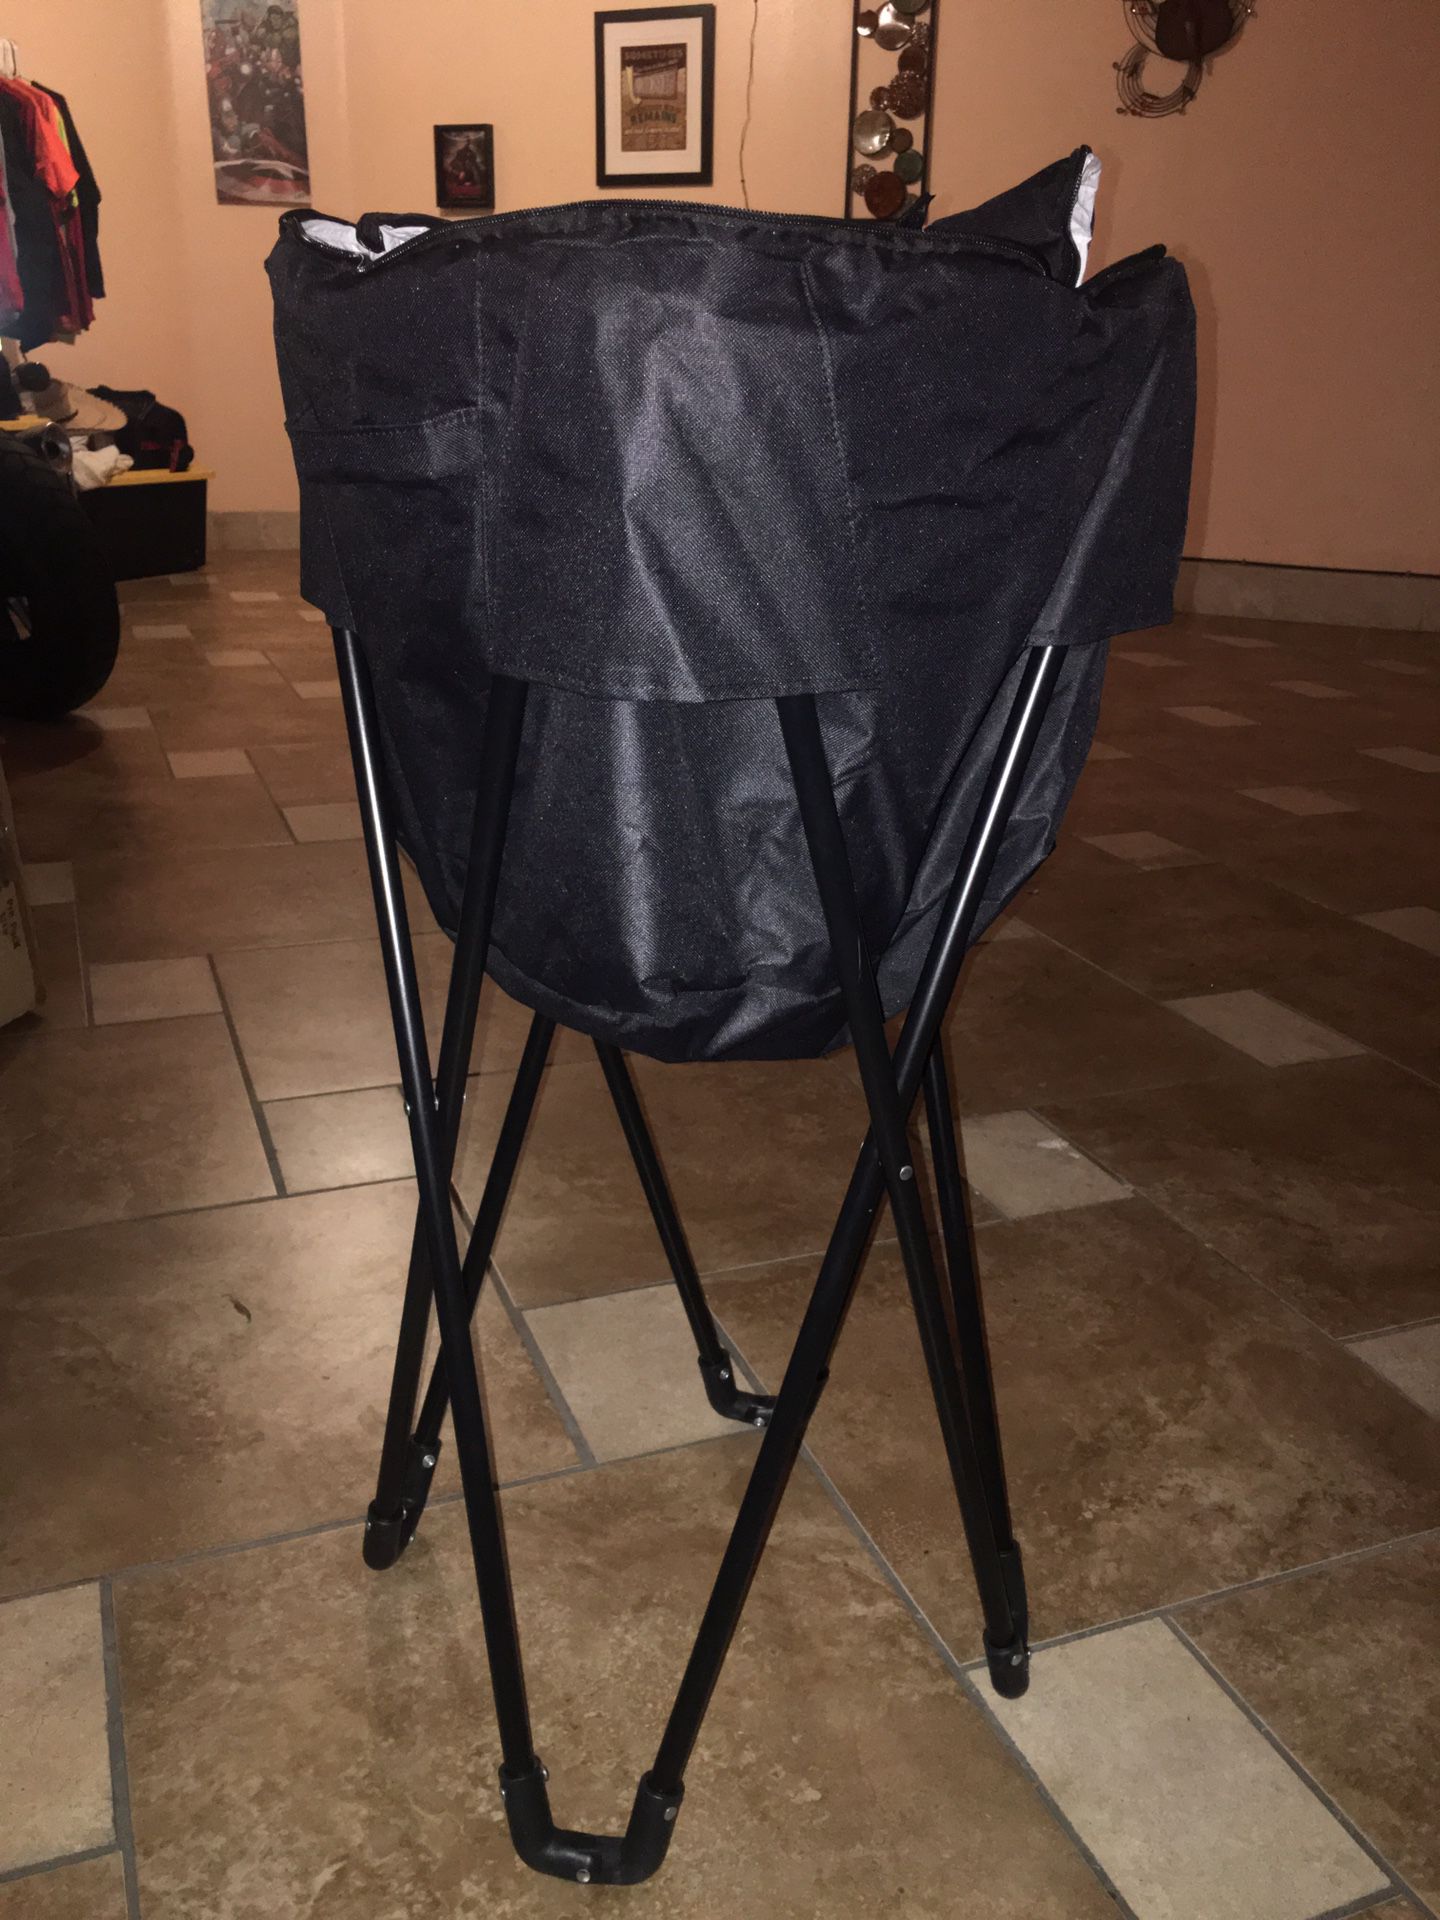 Party/camping cooler w/stand & carry bag